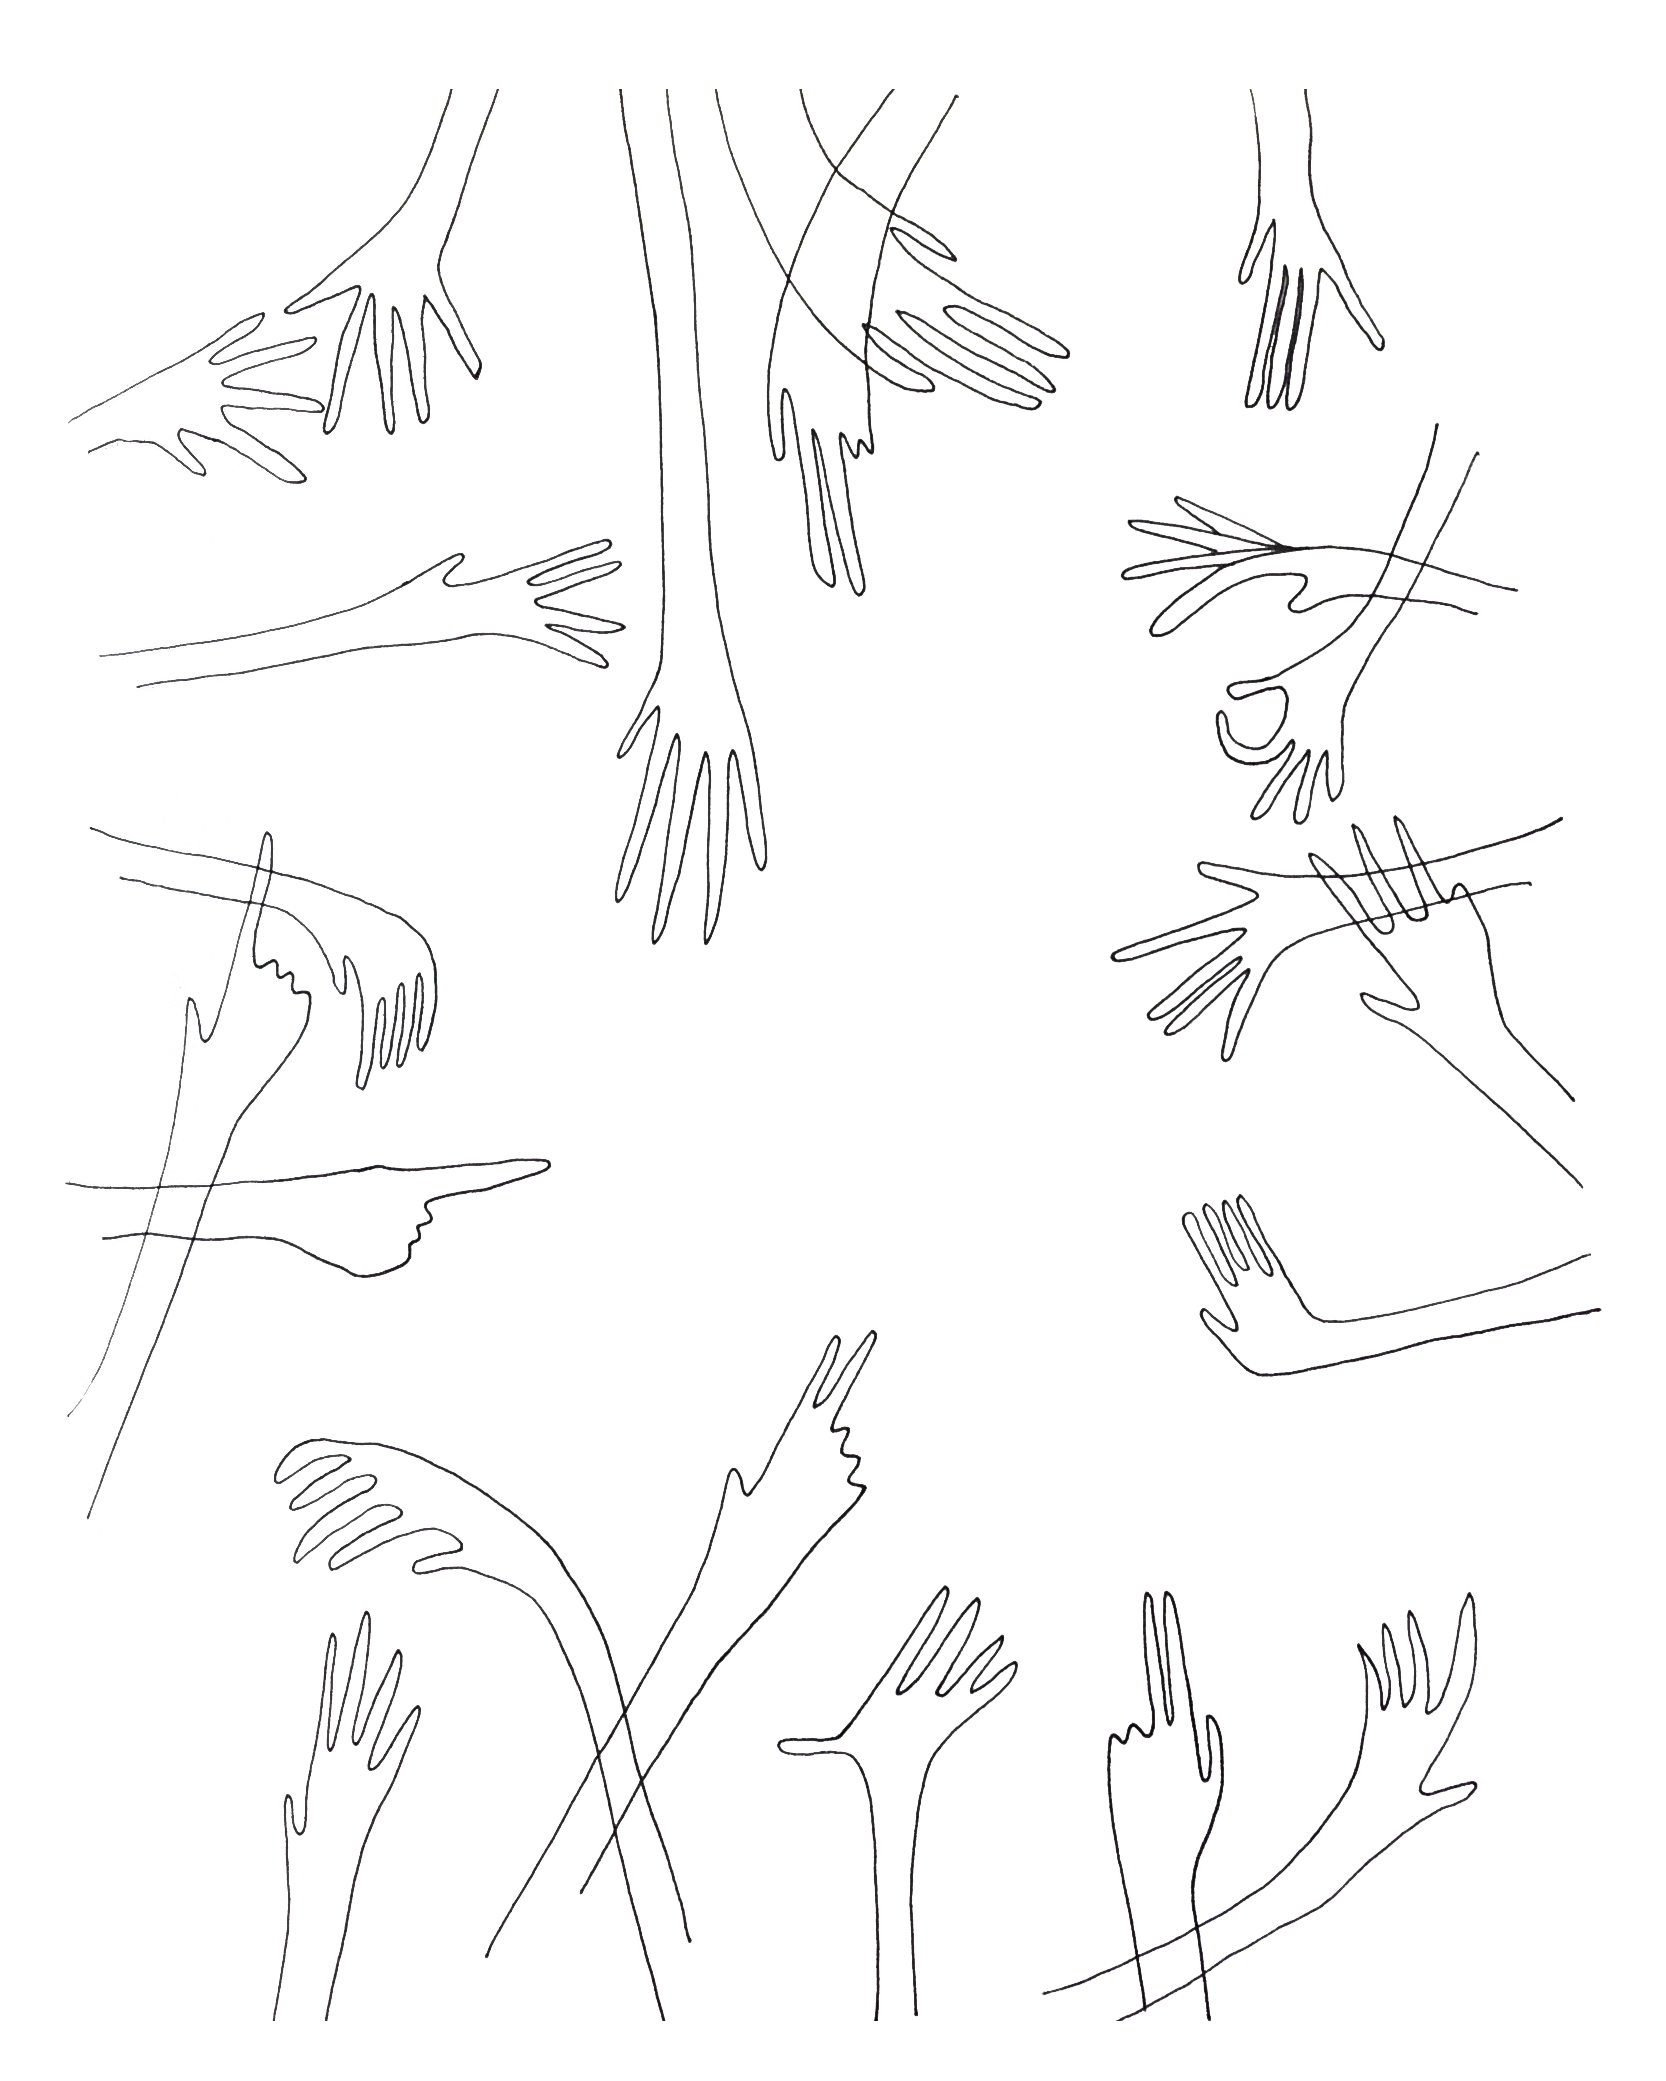 Hands, drawing by Iris Lacoudre